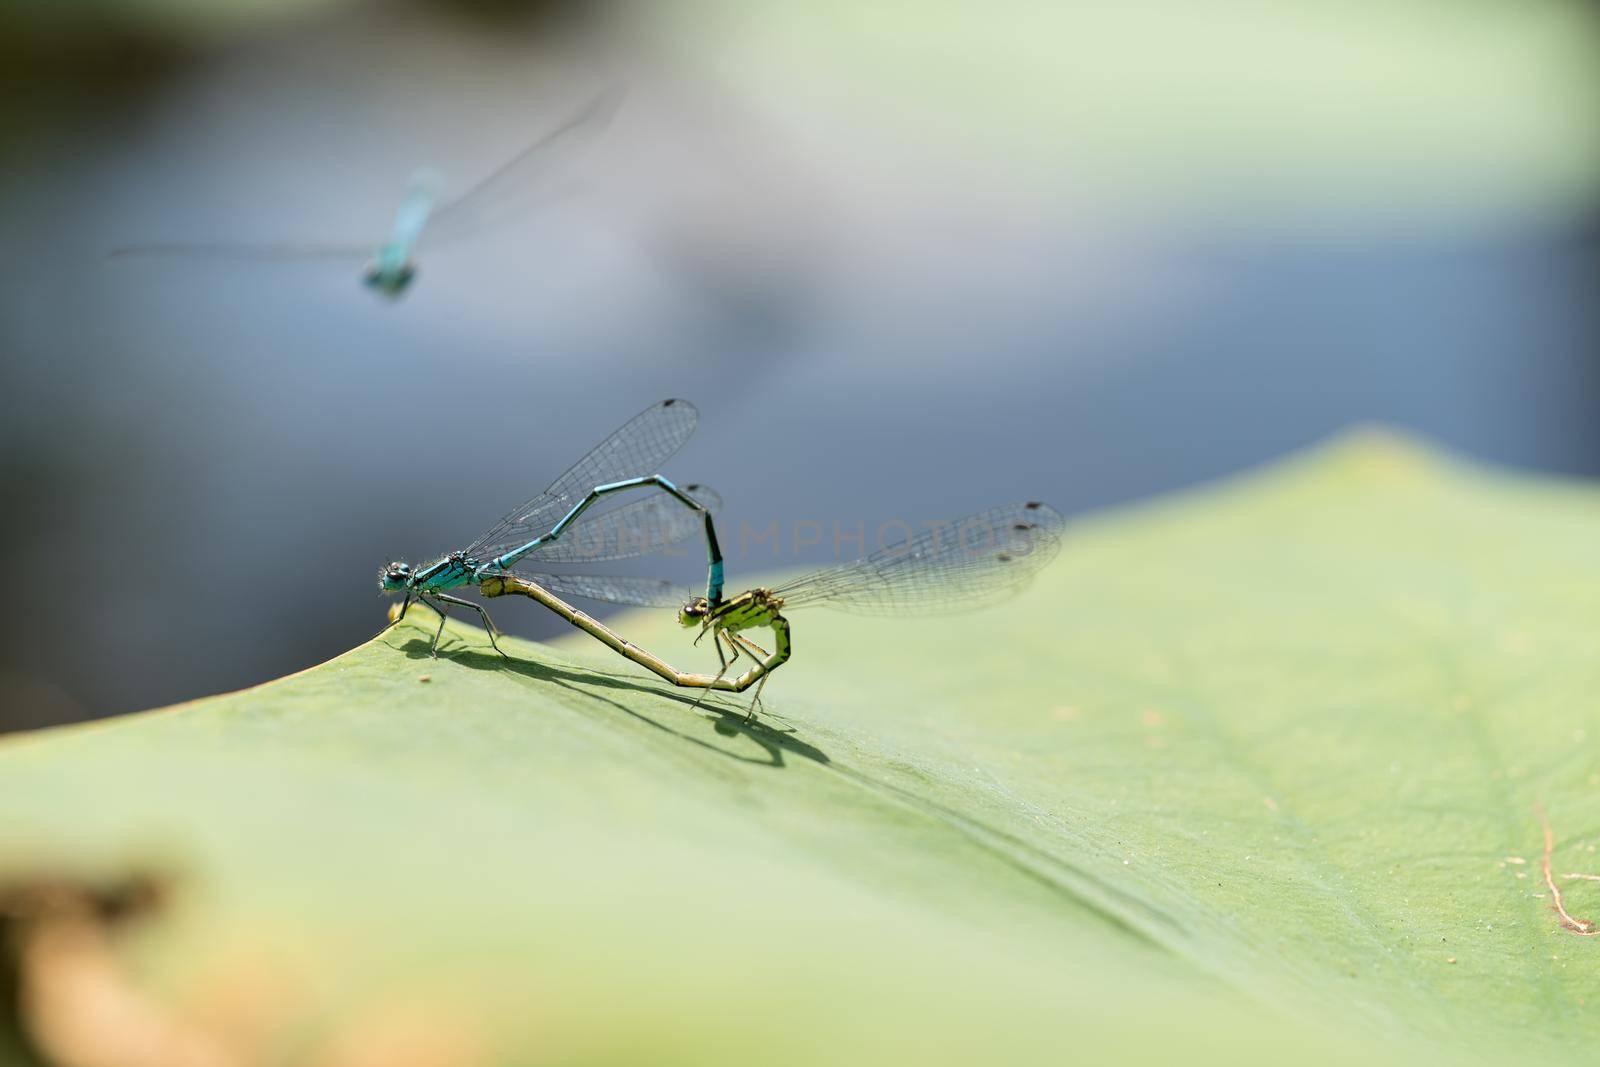 Two blue and green mating damselflies in a love-wheel in a pond, macro close-up by LeoniekvanderVliet